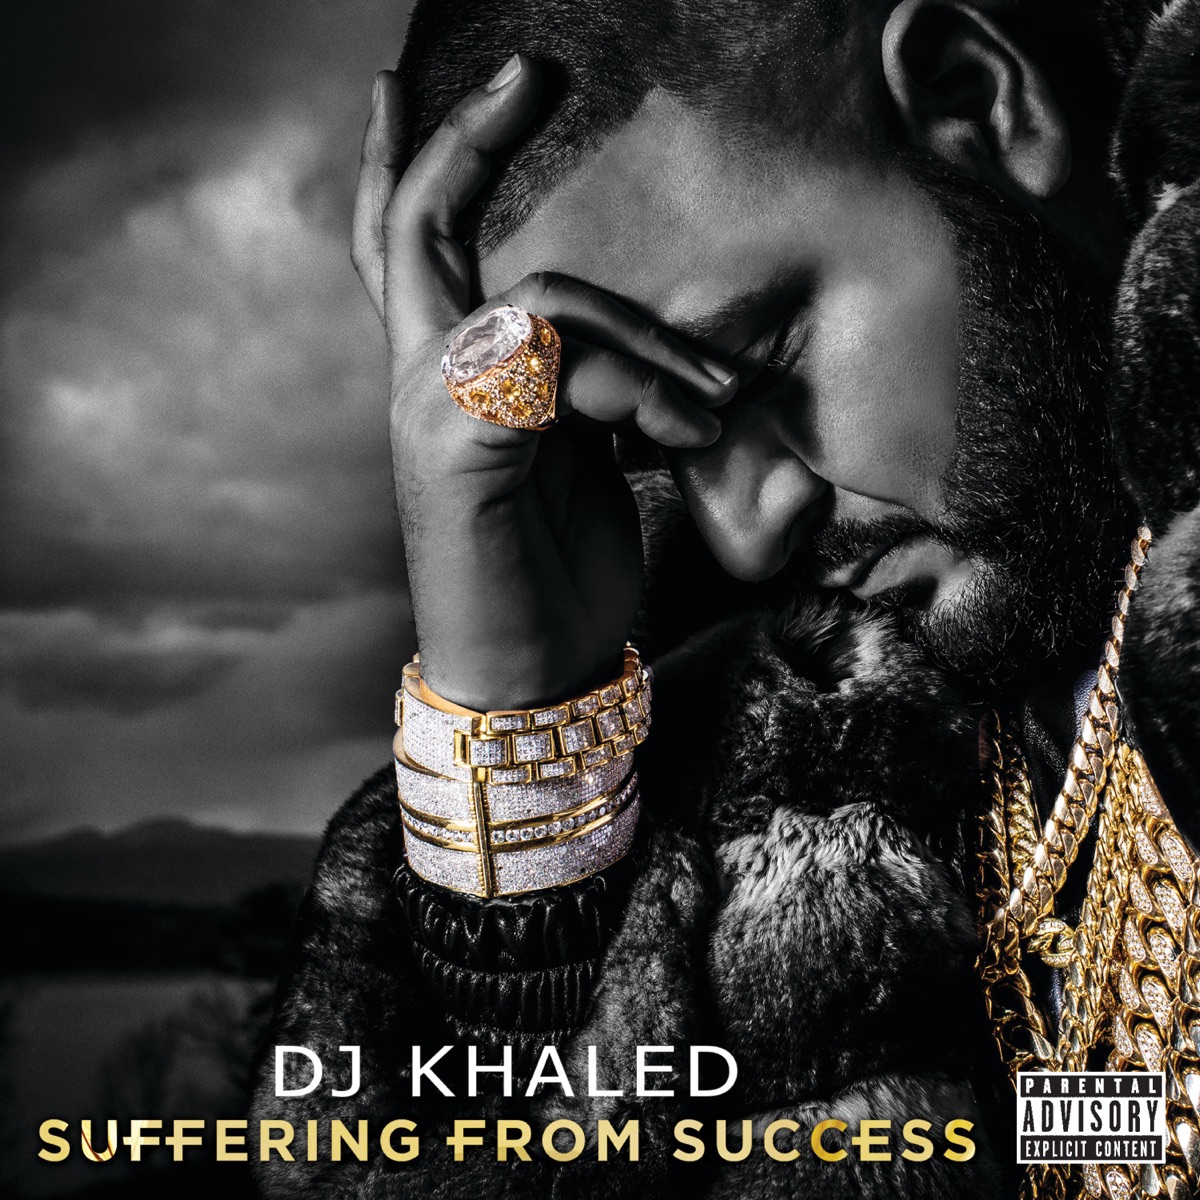 DJ Khaled - Suffering From Success (Deluxe Version)